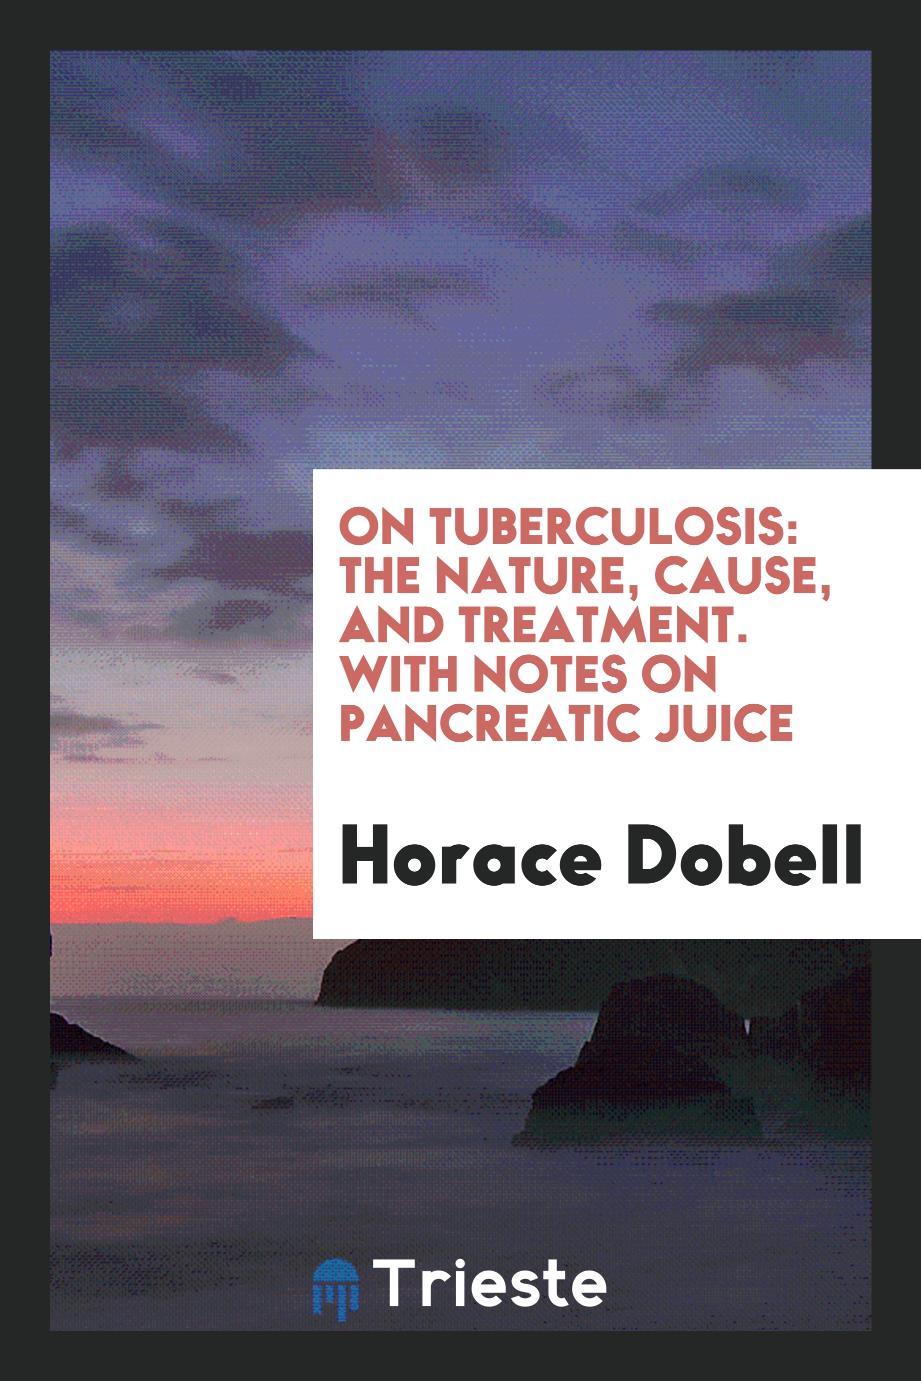 On Tuberculosis: The Nature, Cause, and Treatment. With Notes on Pancreatic Juice